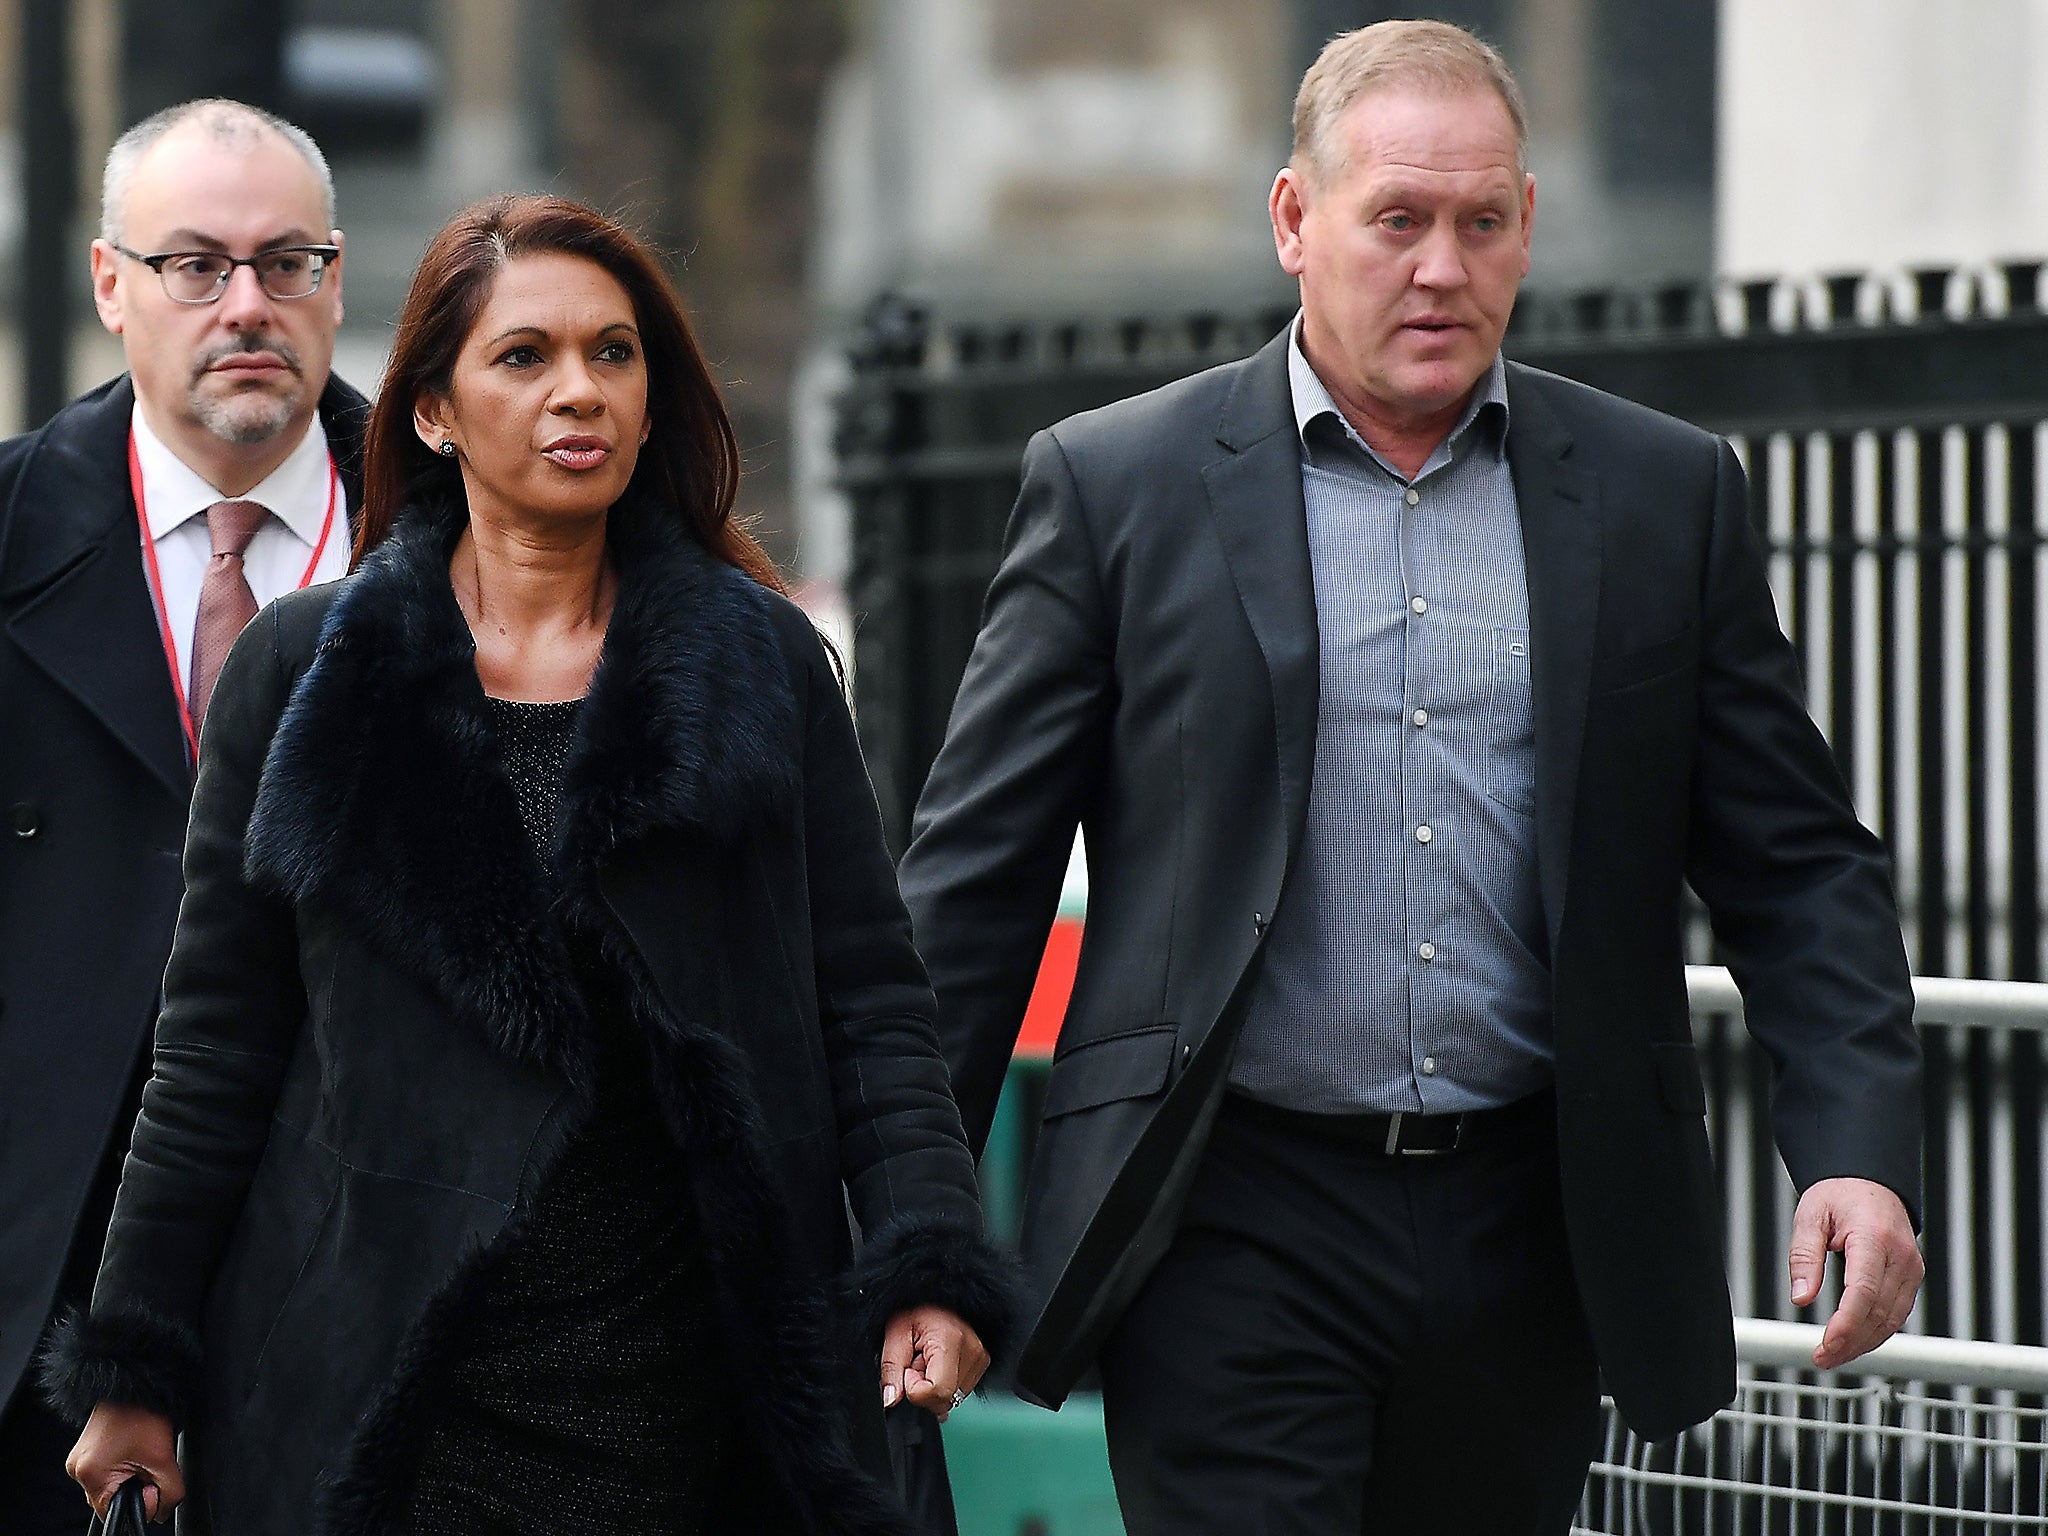 Lead claimant in the Article 50 case, Gina Miller arrives at the Supreme Court in London